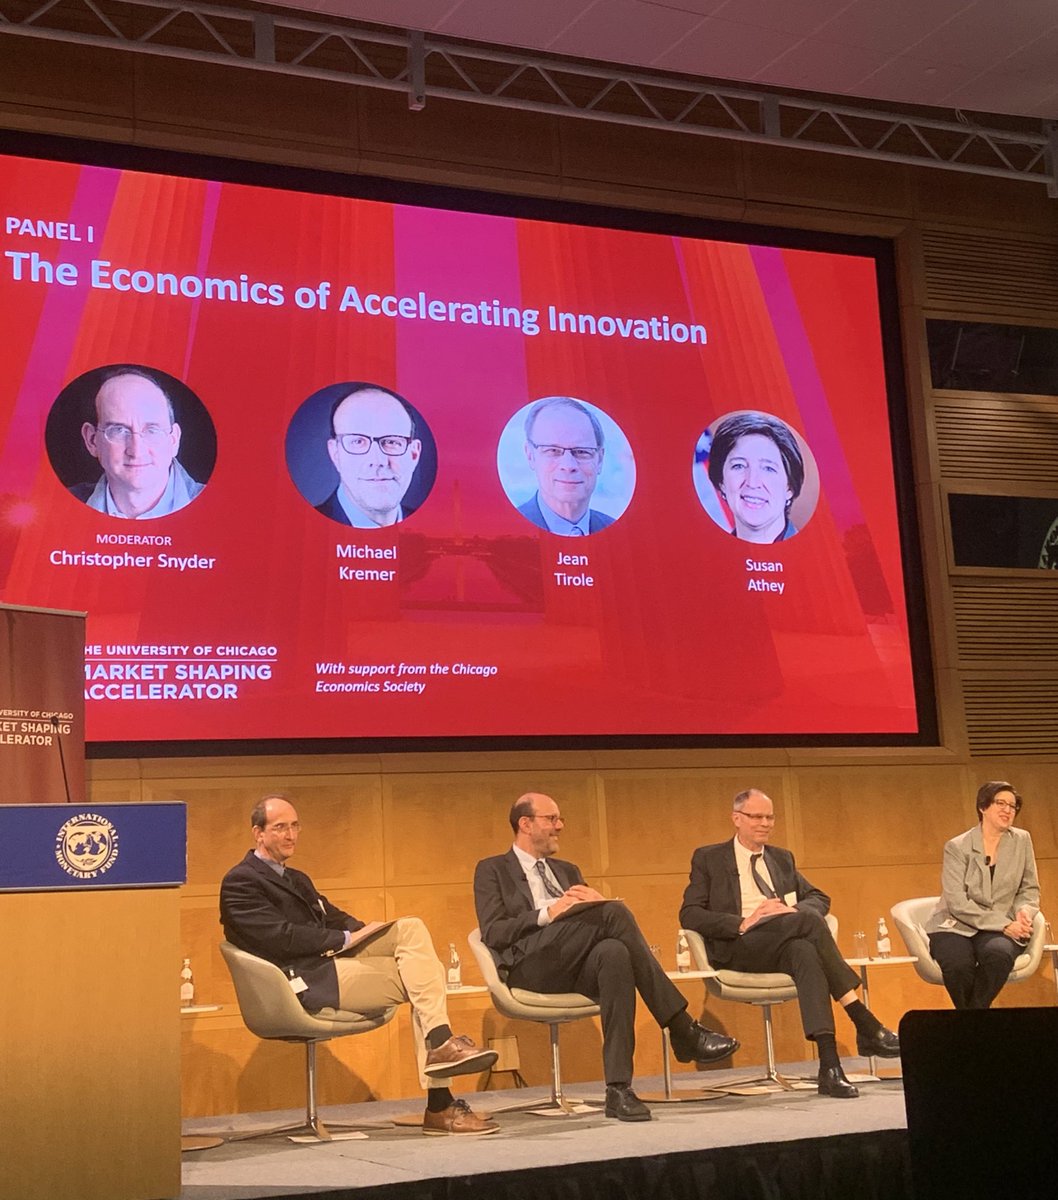 Our amazing speakers @Susan_Athey, Michael Kremer, @JeanTirole, and Christopher Snyder are leading the first panel discussion this evening on the economics of accelerating innovation, with Q&A to follow